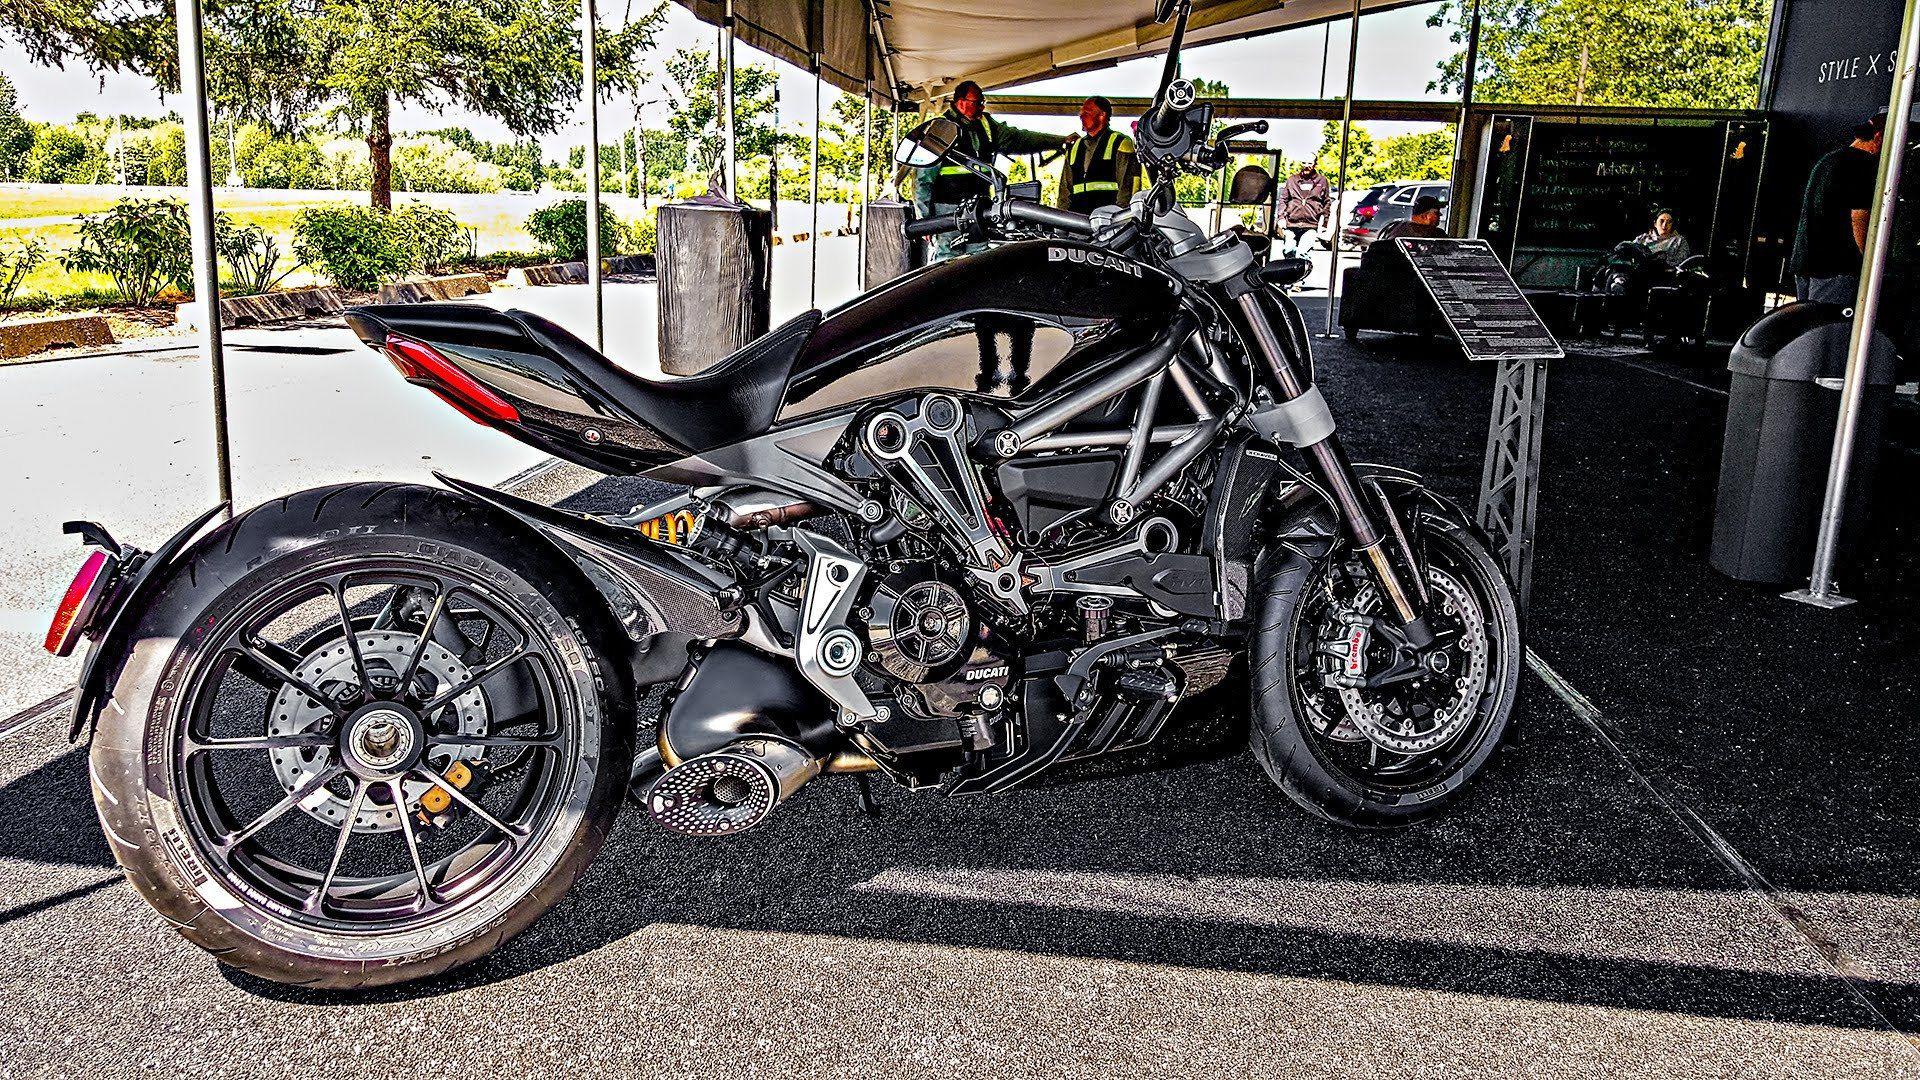 Ducati Diavel Wallpaper Image Photo Picture Background